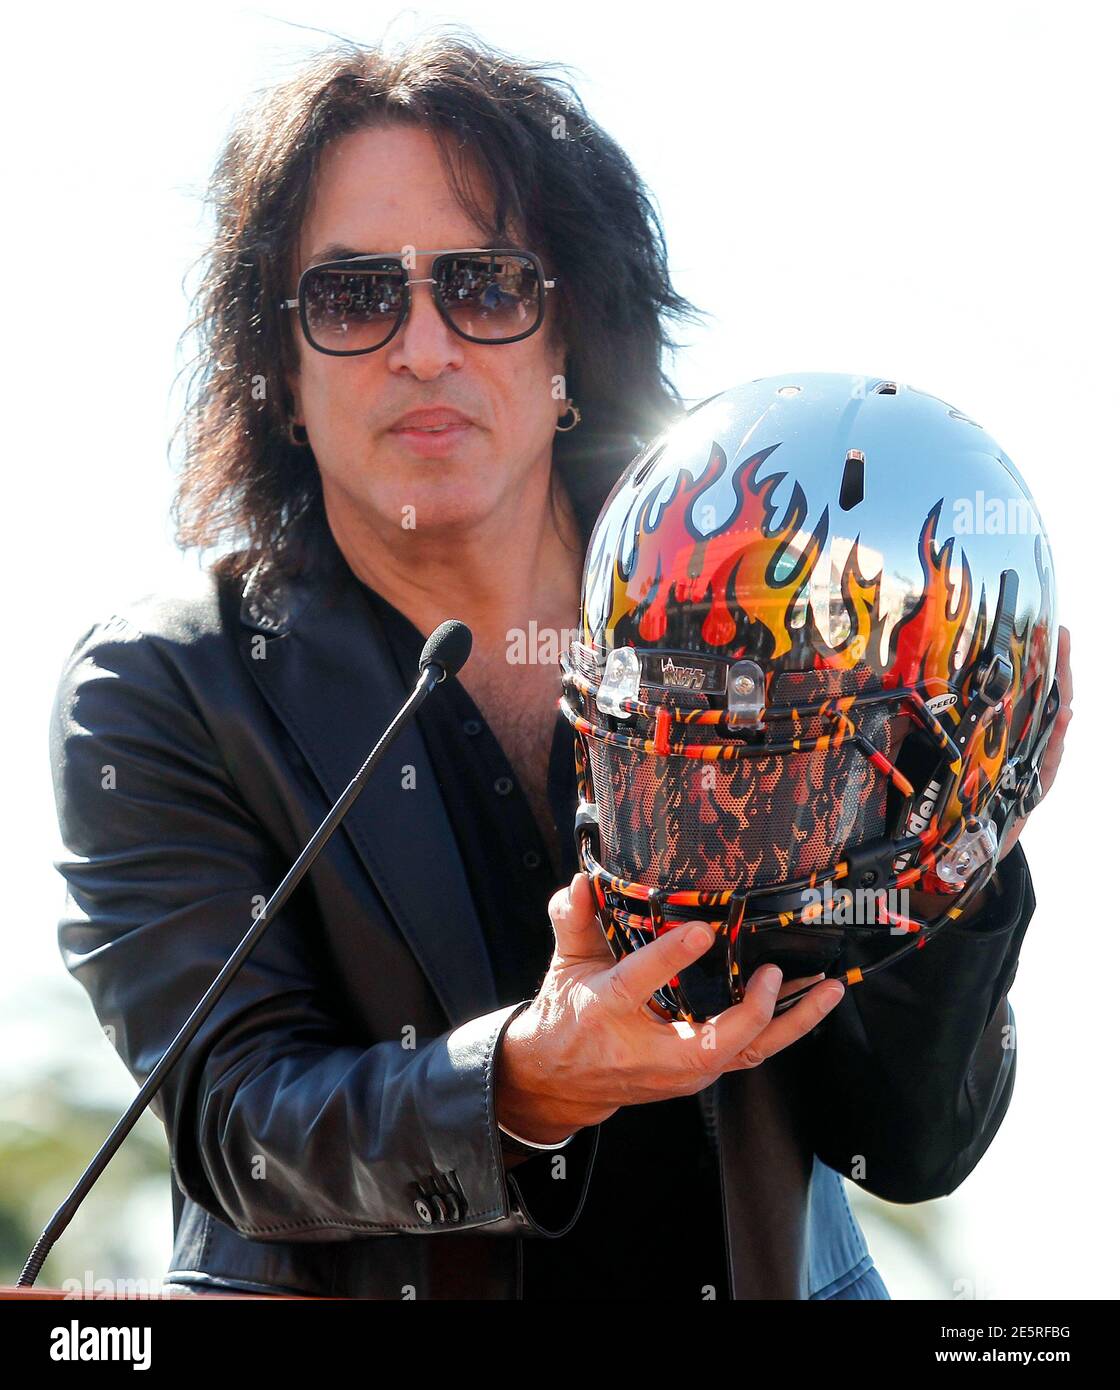 Musician Paul Stanley of rock band Kiss displays a new helmet at a news conference to announce their part-ownership of an Arena Football League team, the Los Angeles Kiss, in Anaheim, California March 10, 2014. The LA Kiss will play their home games in Anaheim and the season kick-off will include a concert by KISS. REUTERS/Alex Gallardo (UNITED STATES - Tags: ENTERTAINMENT SPORT) Stock Photo